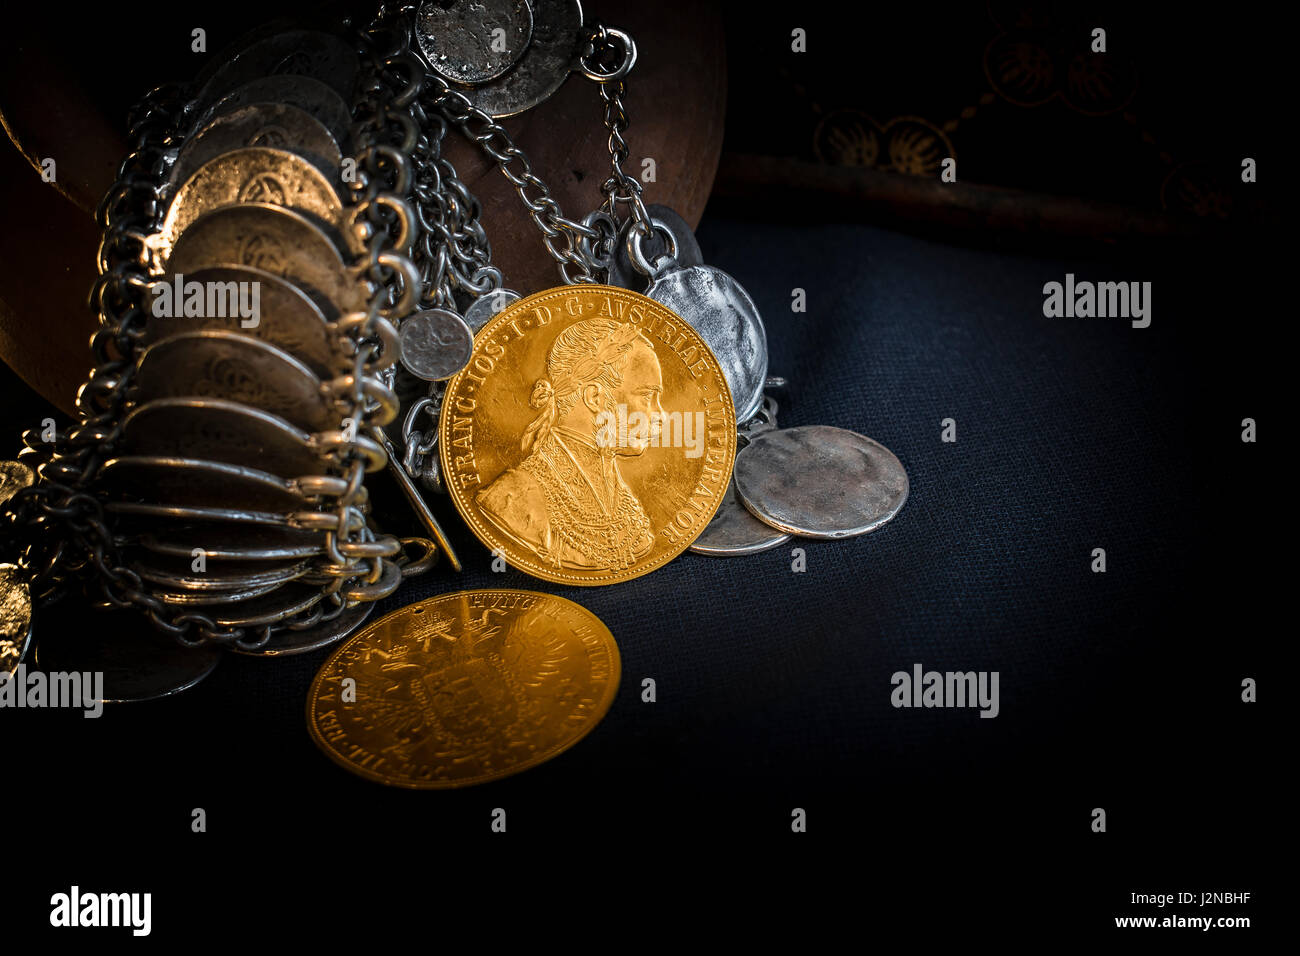 Still Life with two Austria-Hungary thalers, avers and revers of golden coin-ducats from 1915 with Kaiser Franz Joseph I, leaning on silver jewelery a Stock Photo